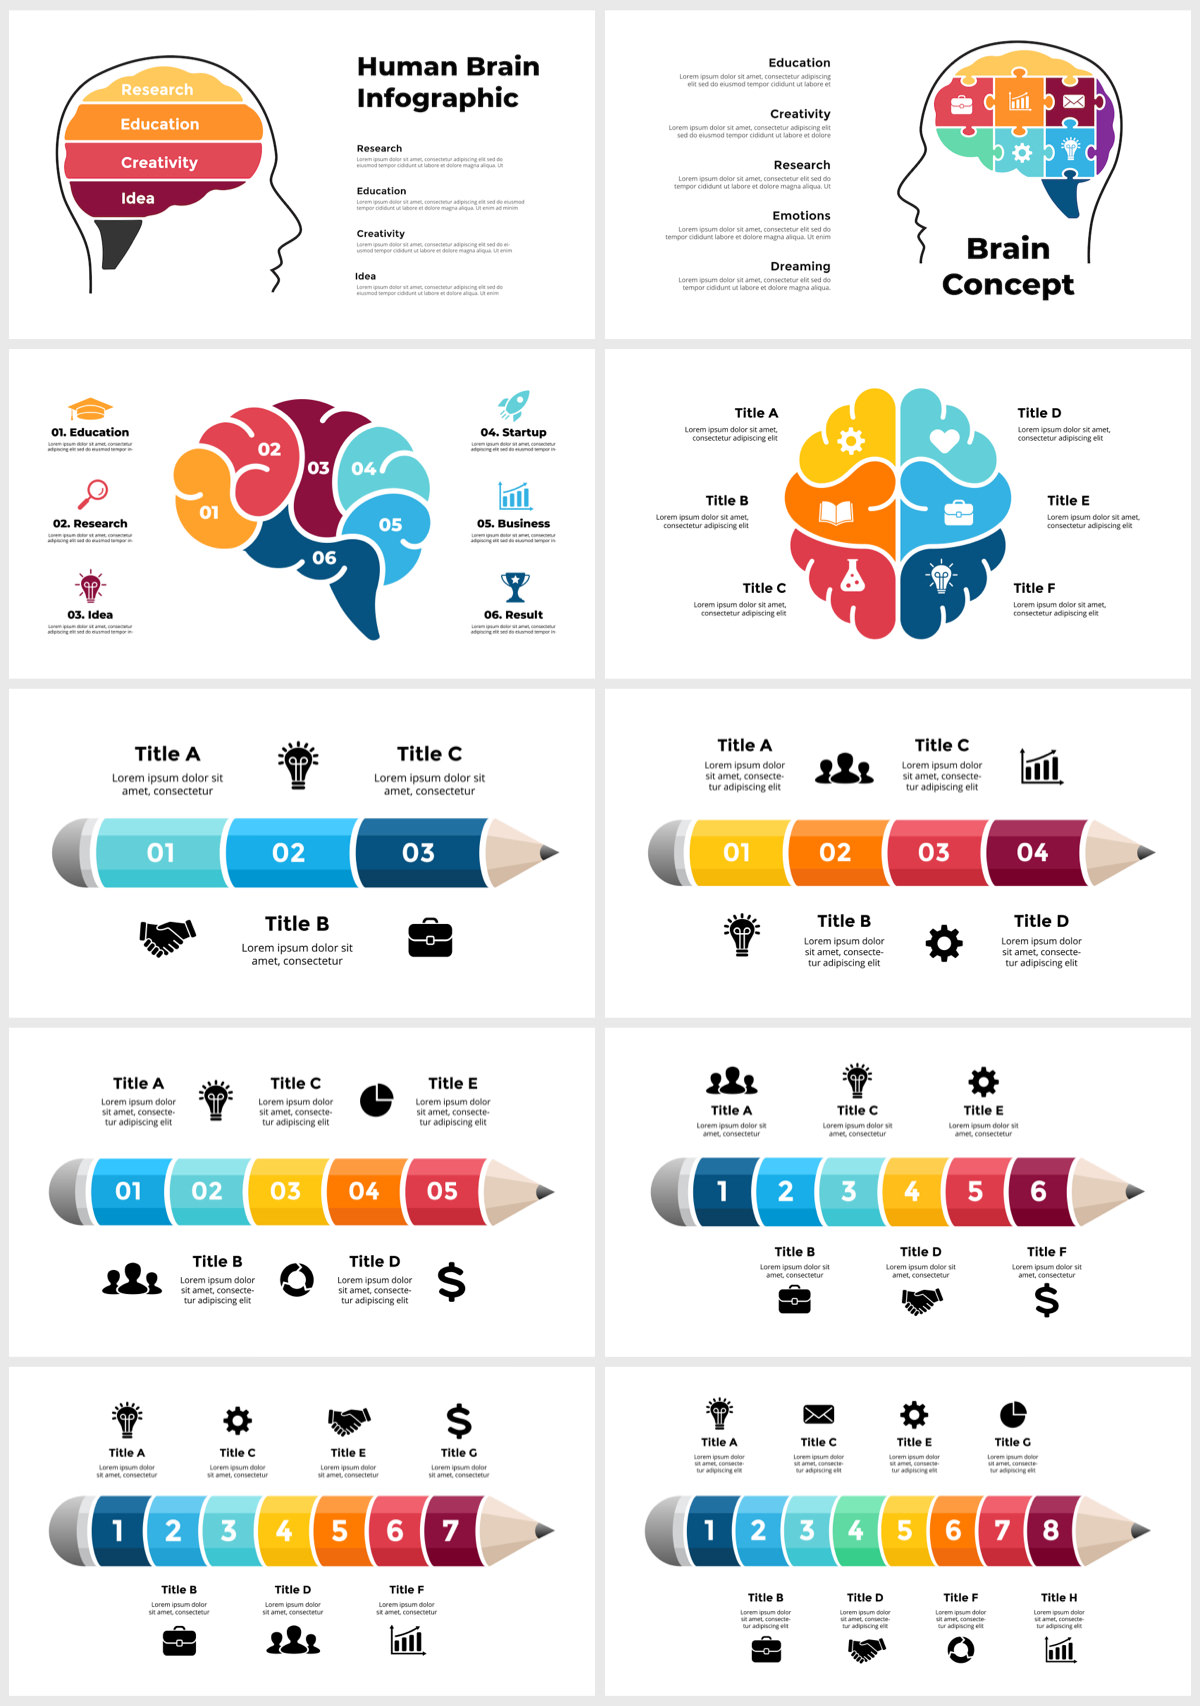 Wowly - 3500 Infographics & Presentation Templates! Updated! PowerPoint Canva Figma Sketch Ai Psd. - 168